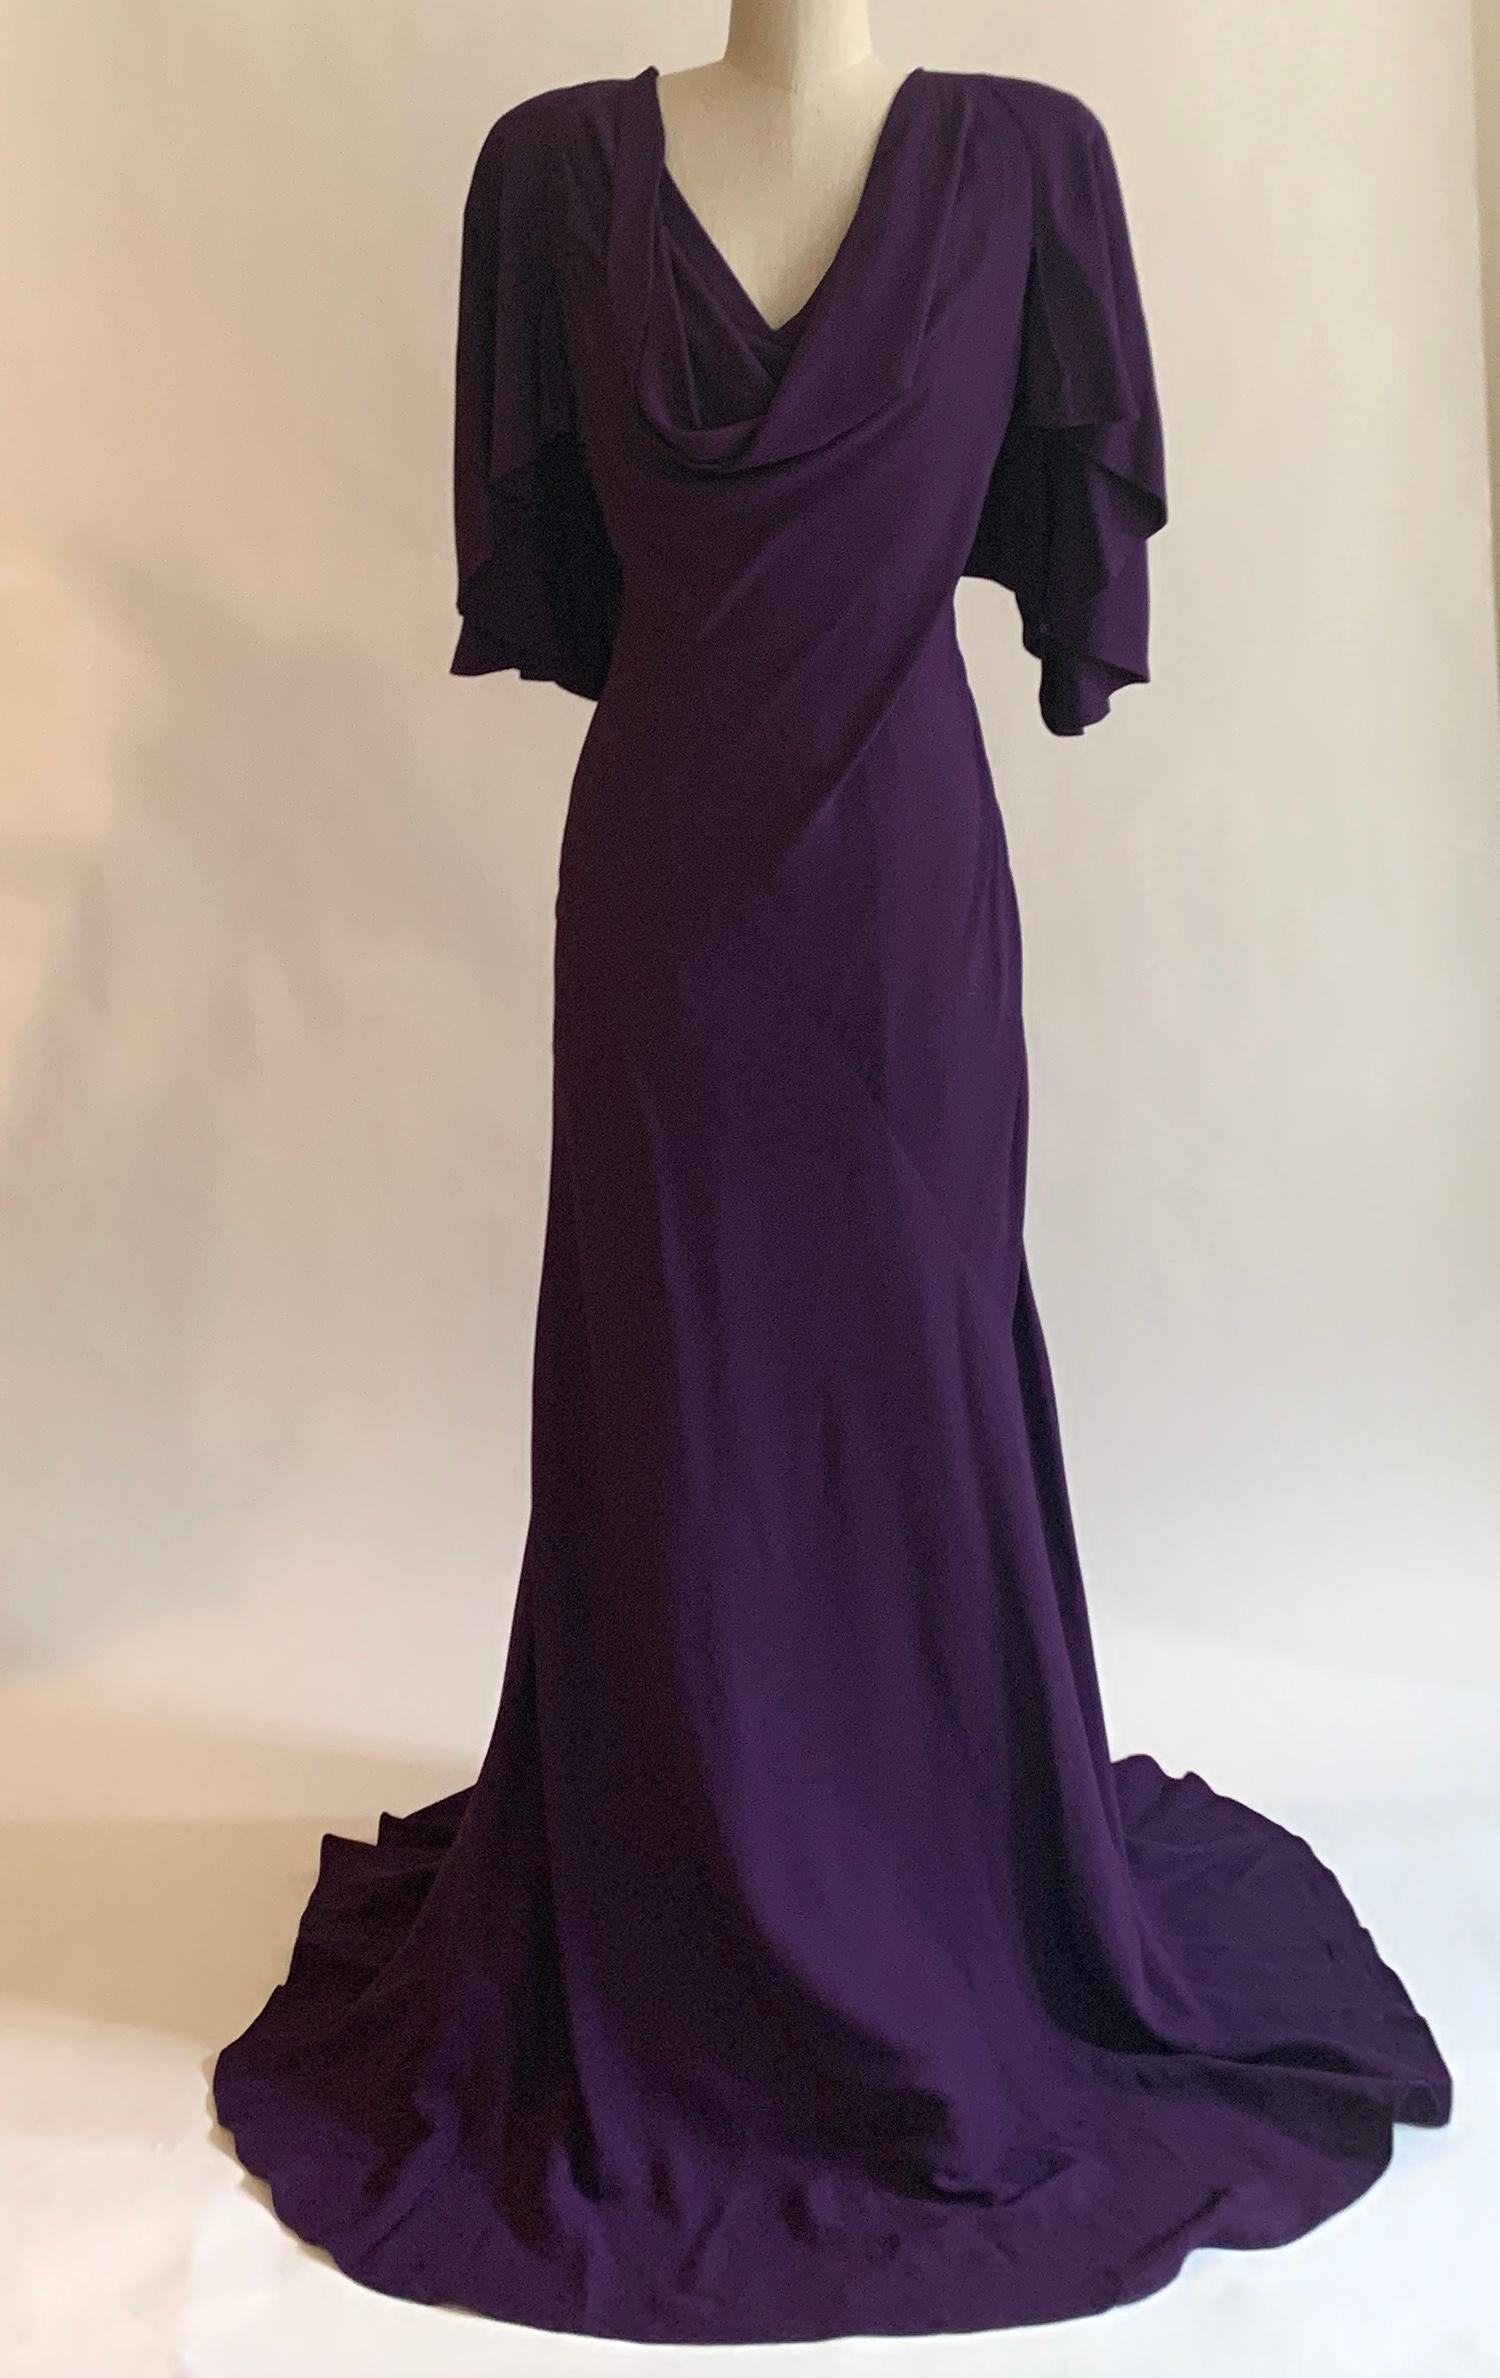 Alexander McQueen 2010 violet purple gown with a short draped sleeve that opens into a cape back. Bias seam at skirt opens the gown's shape from a fitted hip to a swishy bottom. Padded at shoulders. Hidden back and side zip create a super tailored